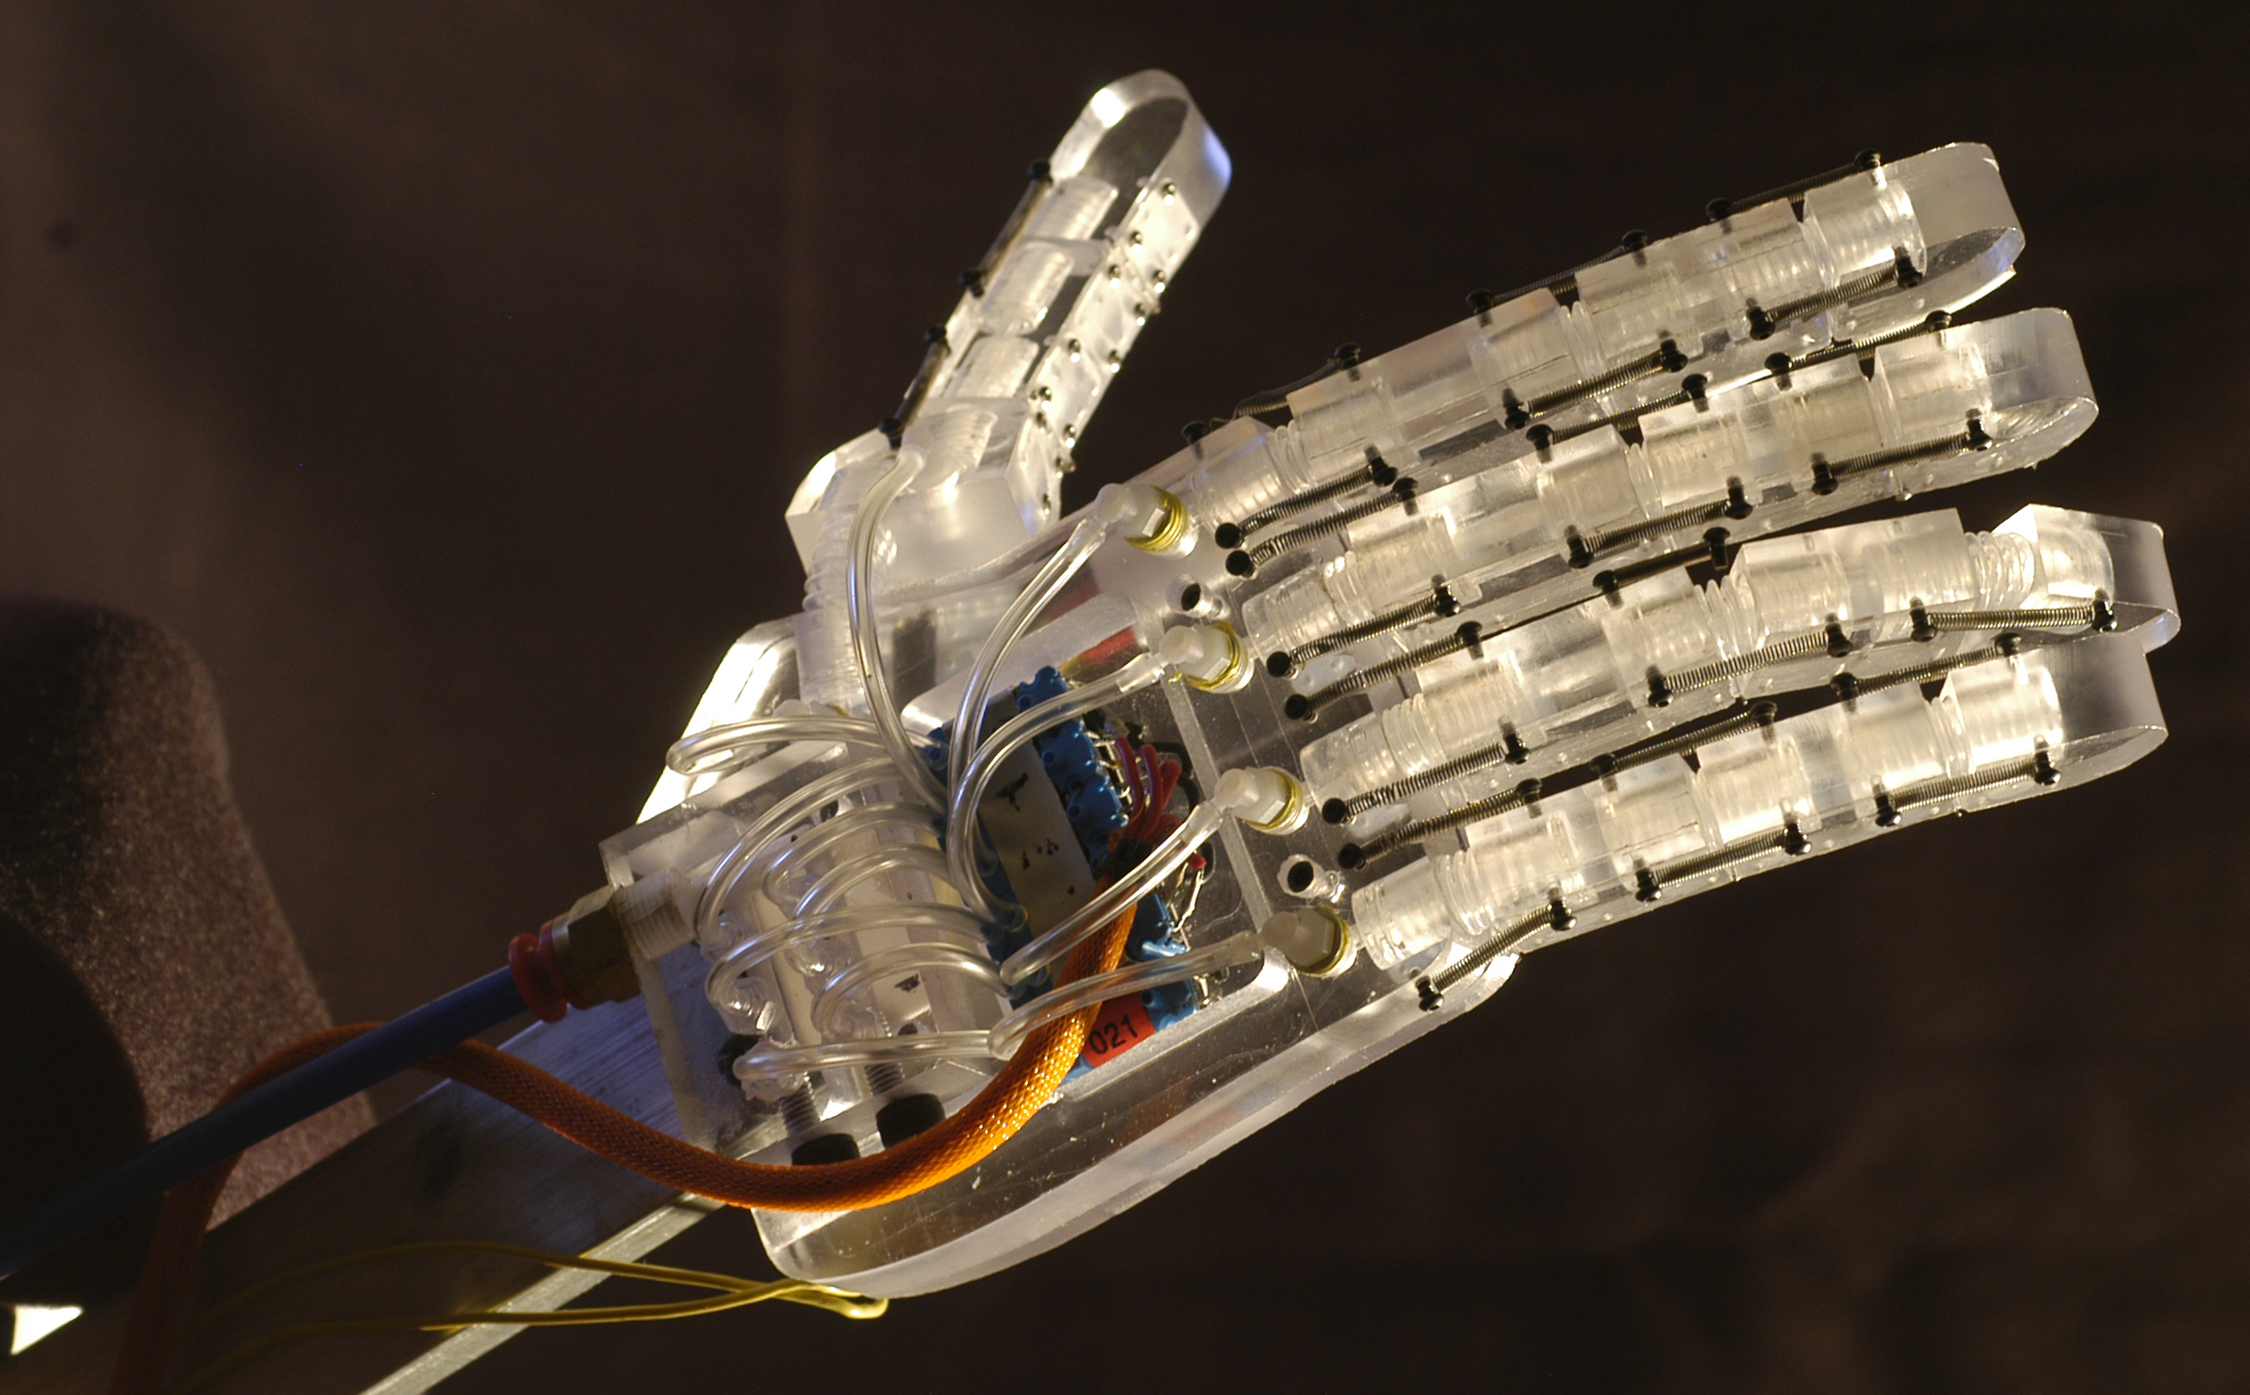 The improved fully articulated robotic hand RAPHaEL 2 can firmly hold objects ranging from a soup can to a raw egg. It uses force and position feedback to automatically control the grasping force and finger position.